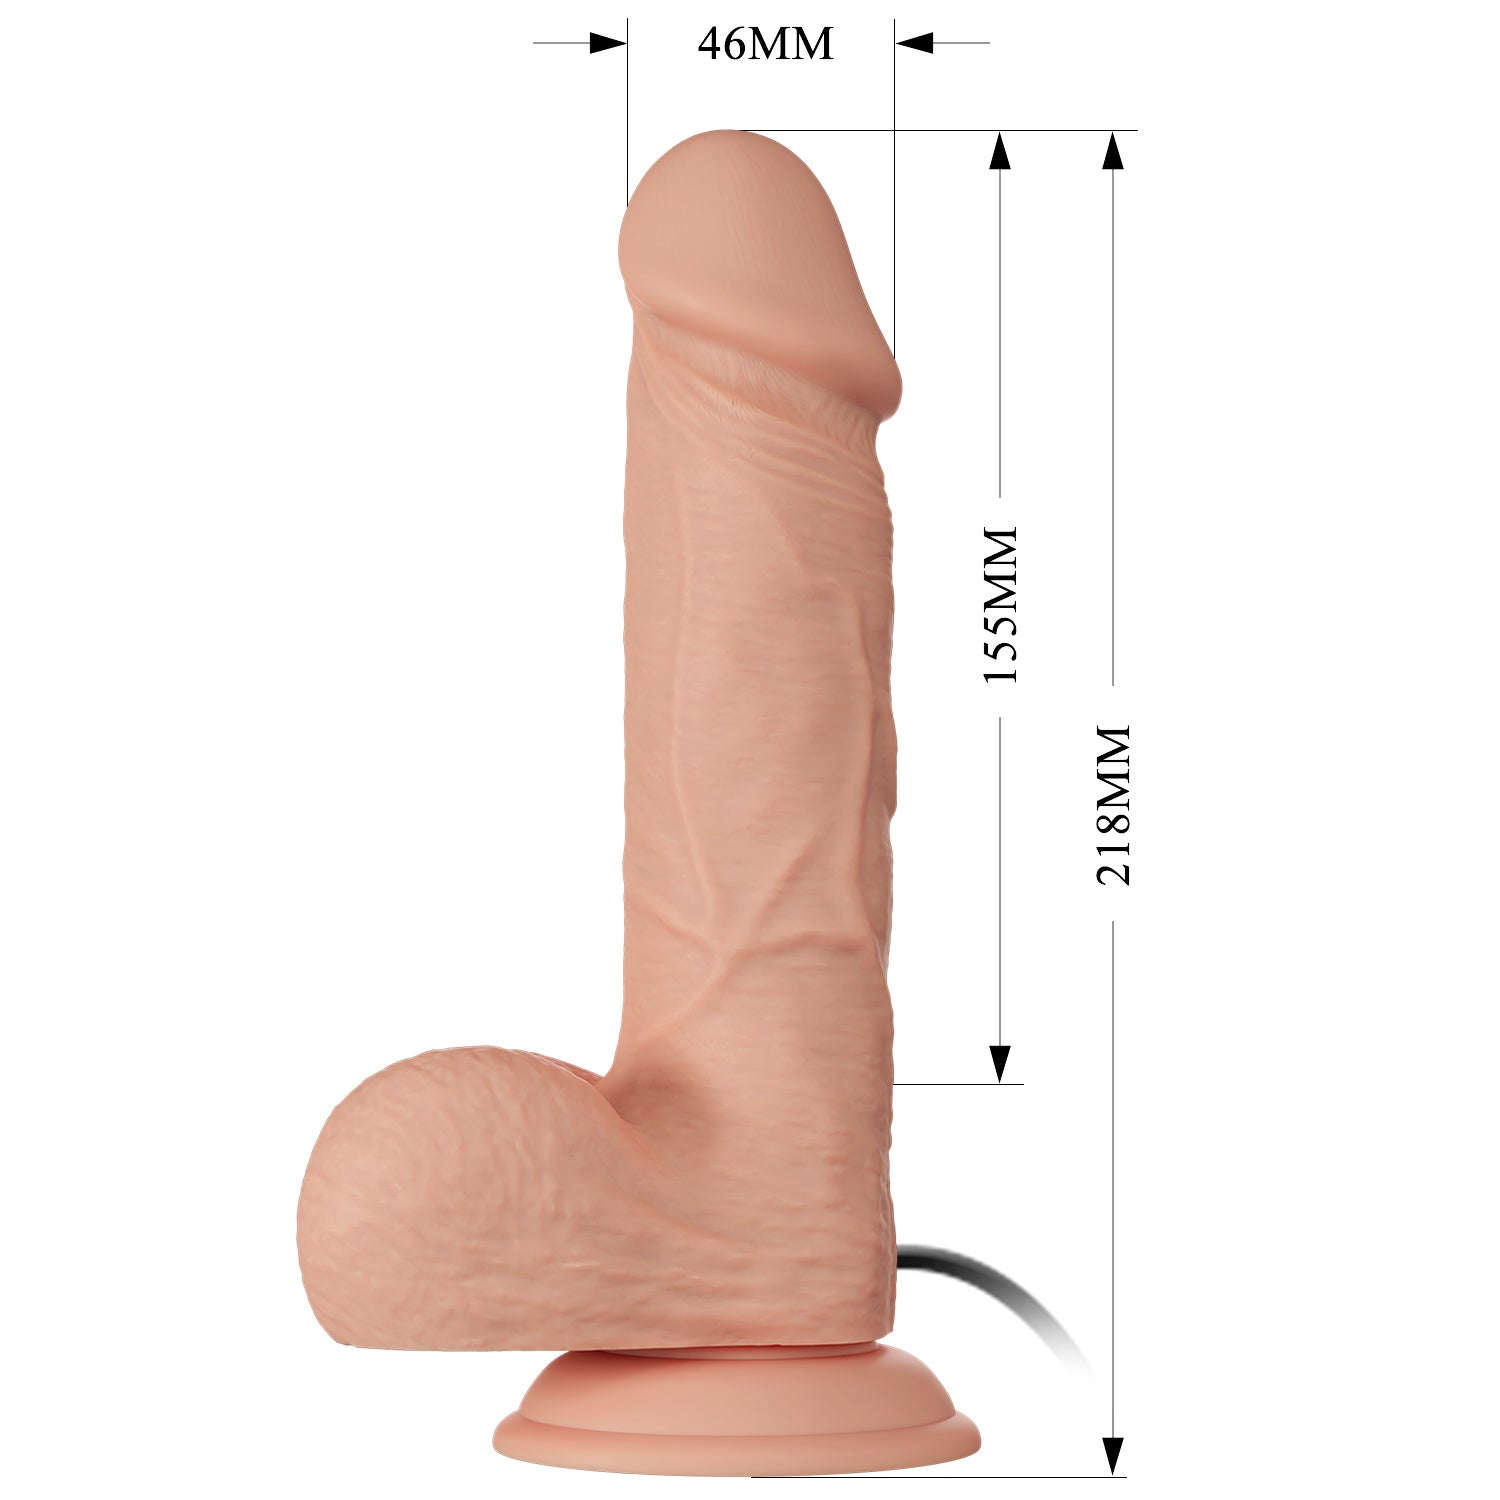 Baile 8.5 Inch Lifelike Vibrating Dildo with Suction Cup in Flesh